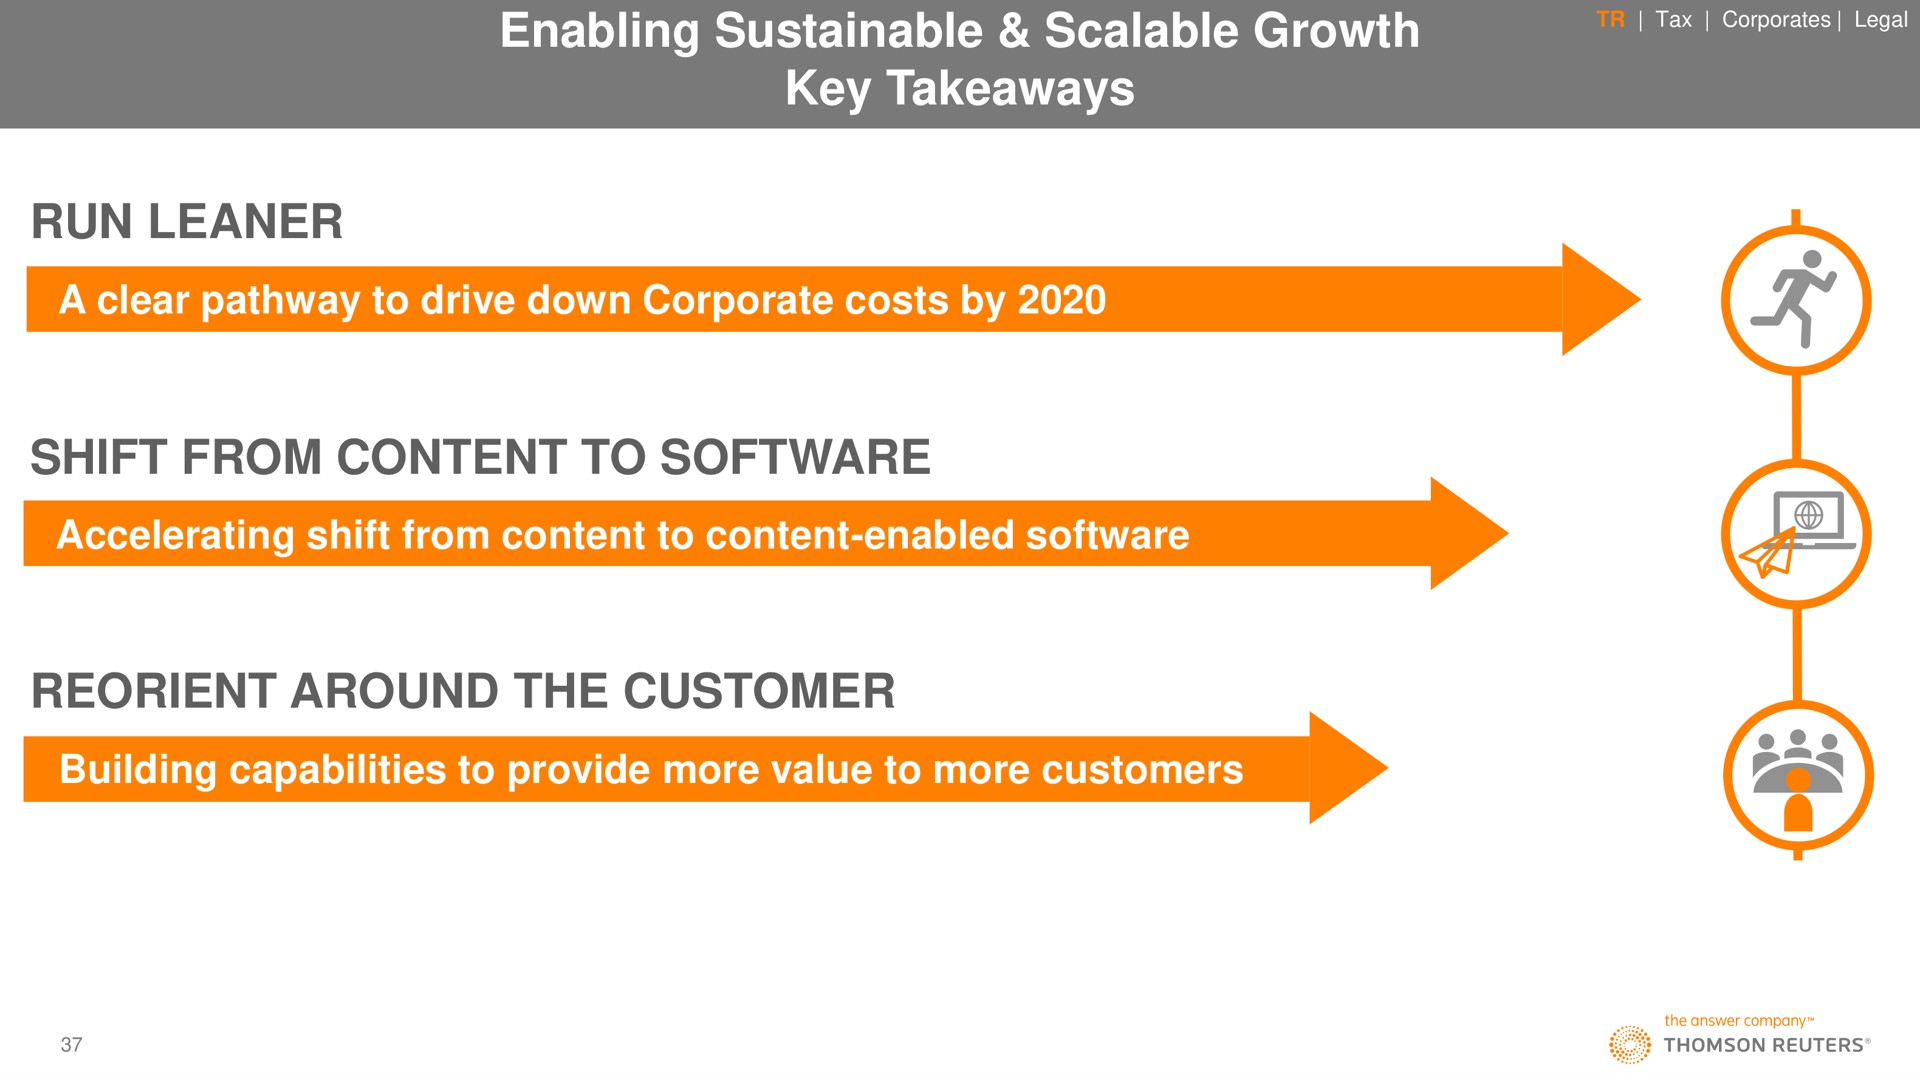 enabling sustainable scalable growth key run leaner a clear pathway to drive down corporate costs by shift from content to accelerating shift from content to content enabled reorient around the customer building capabilities to provide more value to more customers | Thomson Reuters